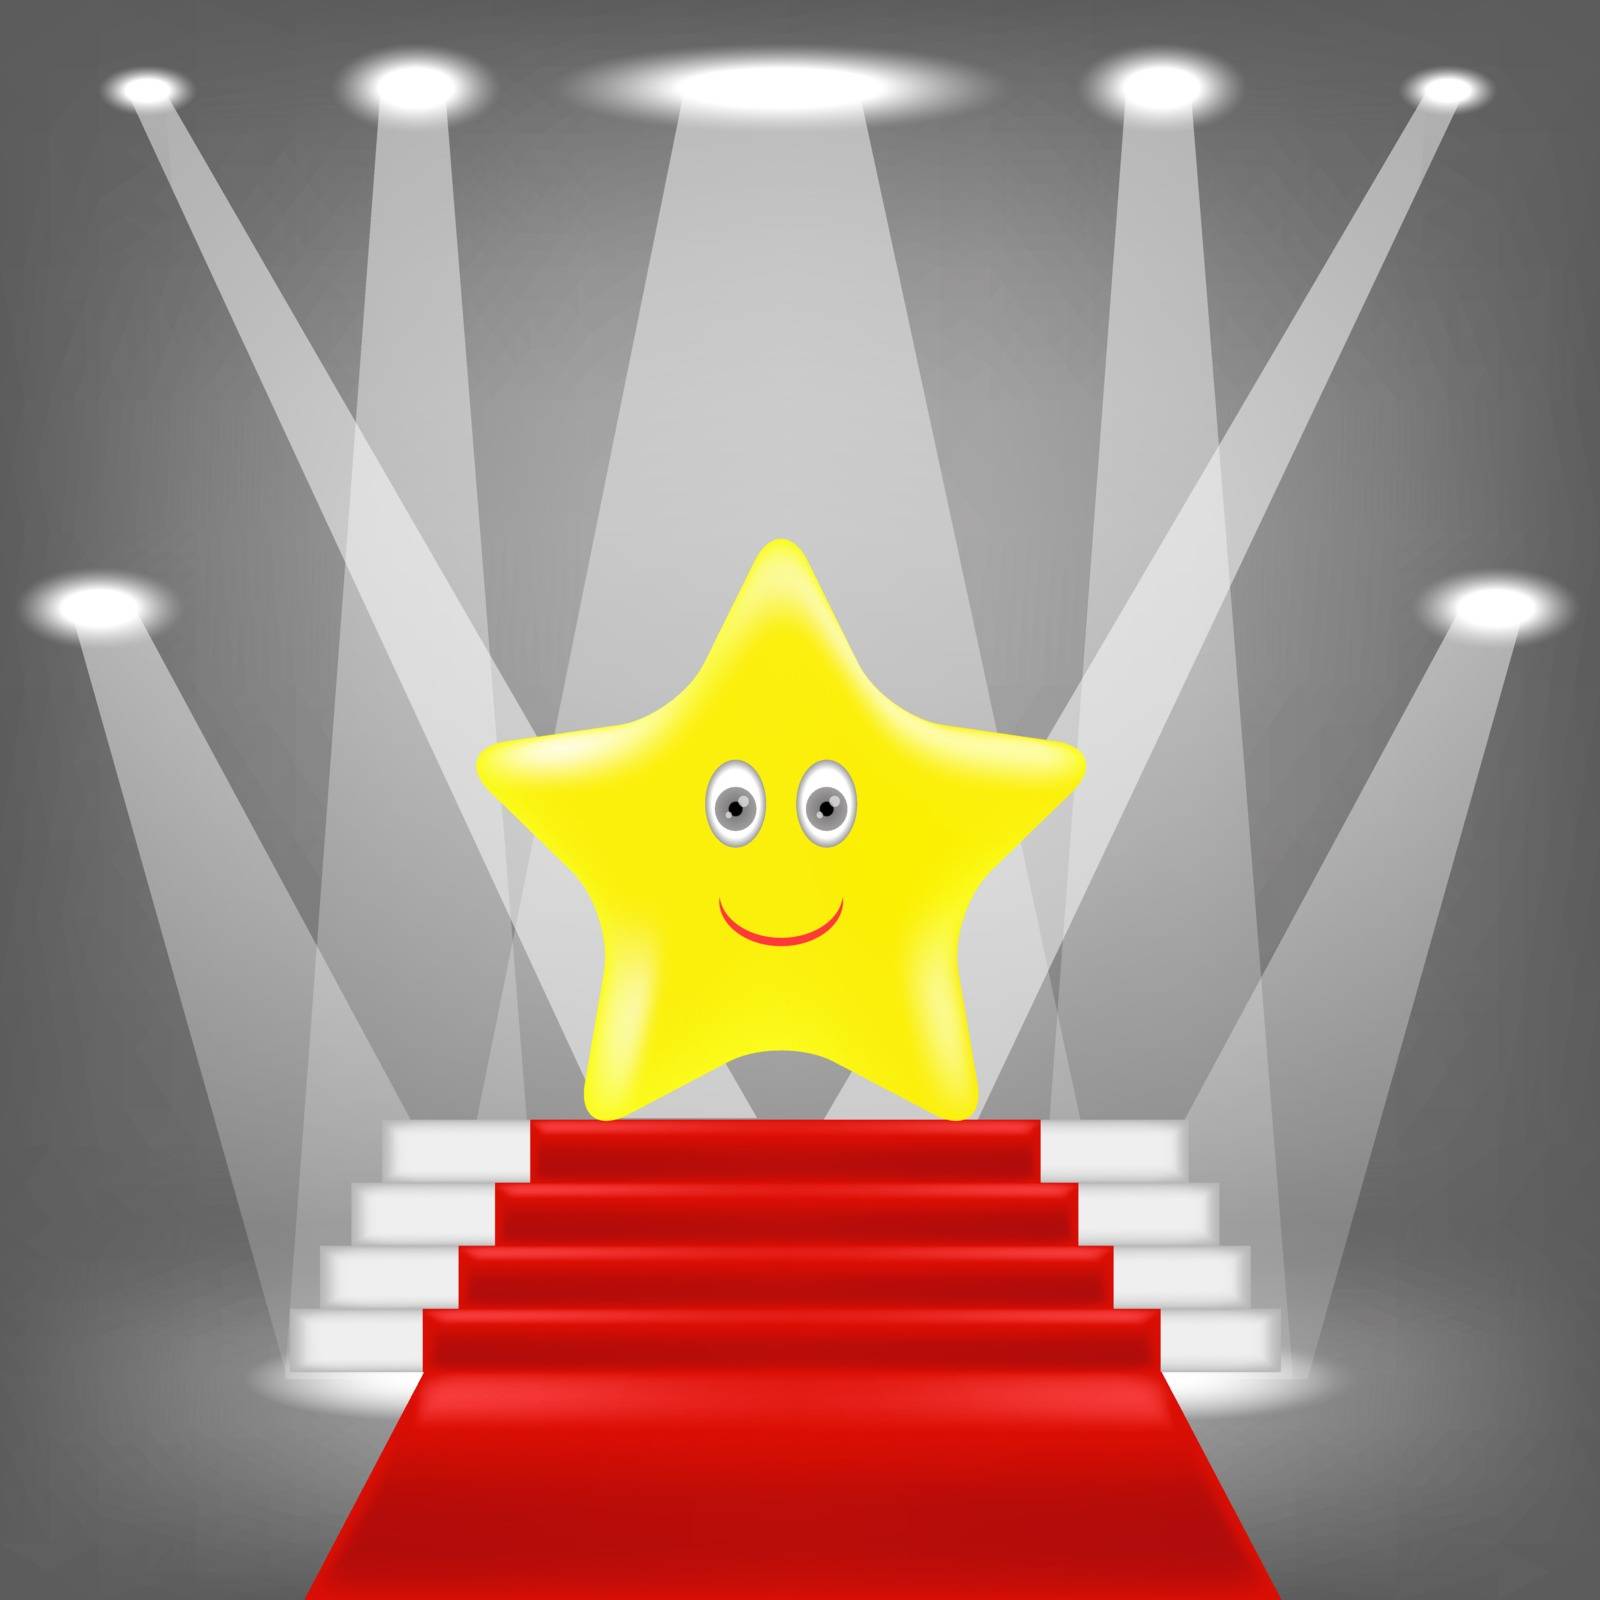 Single Gold Yellow Star on Red Carpet.